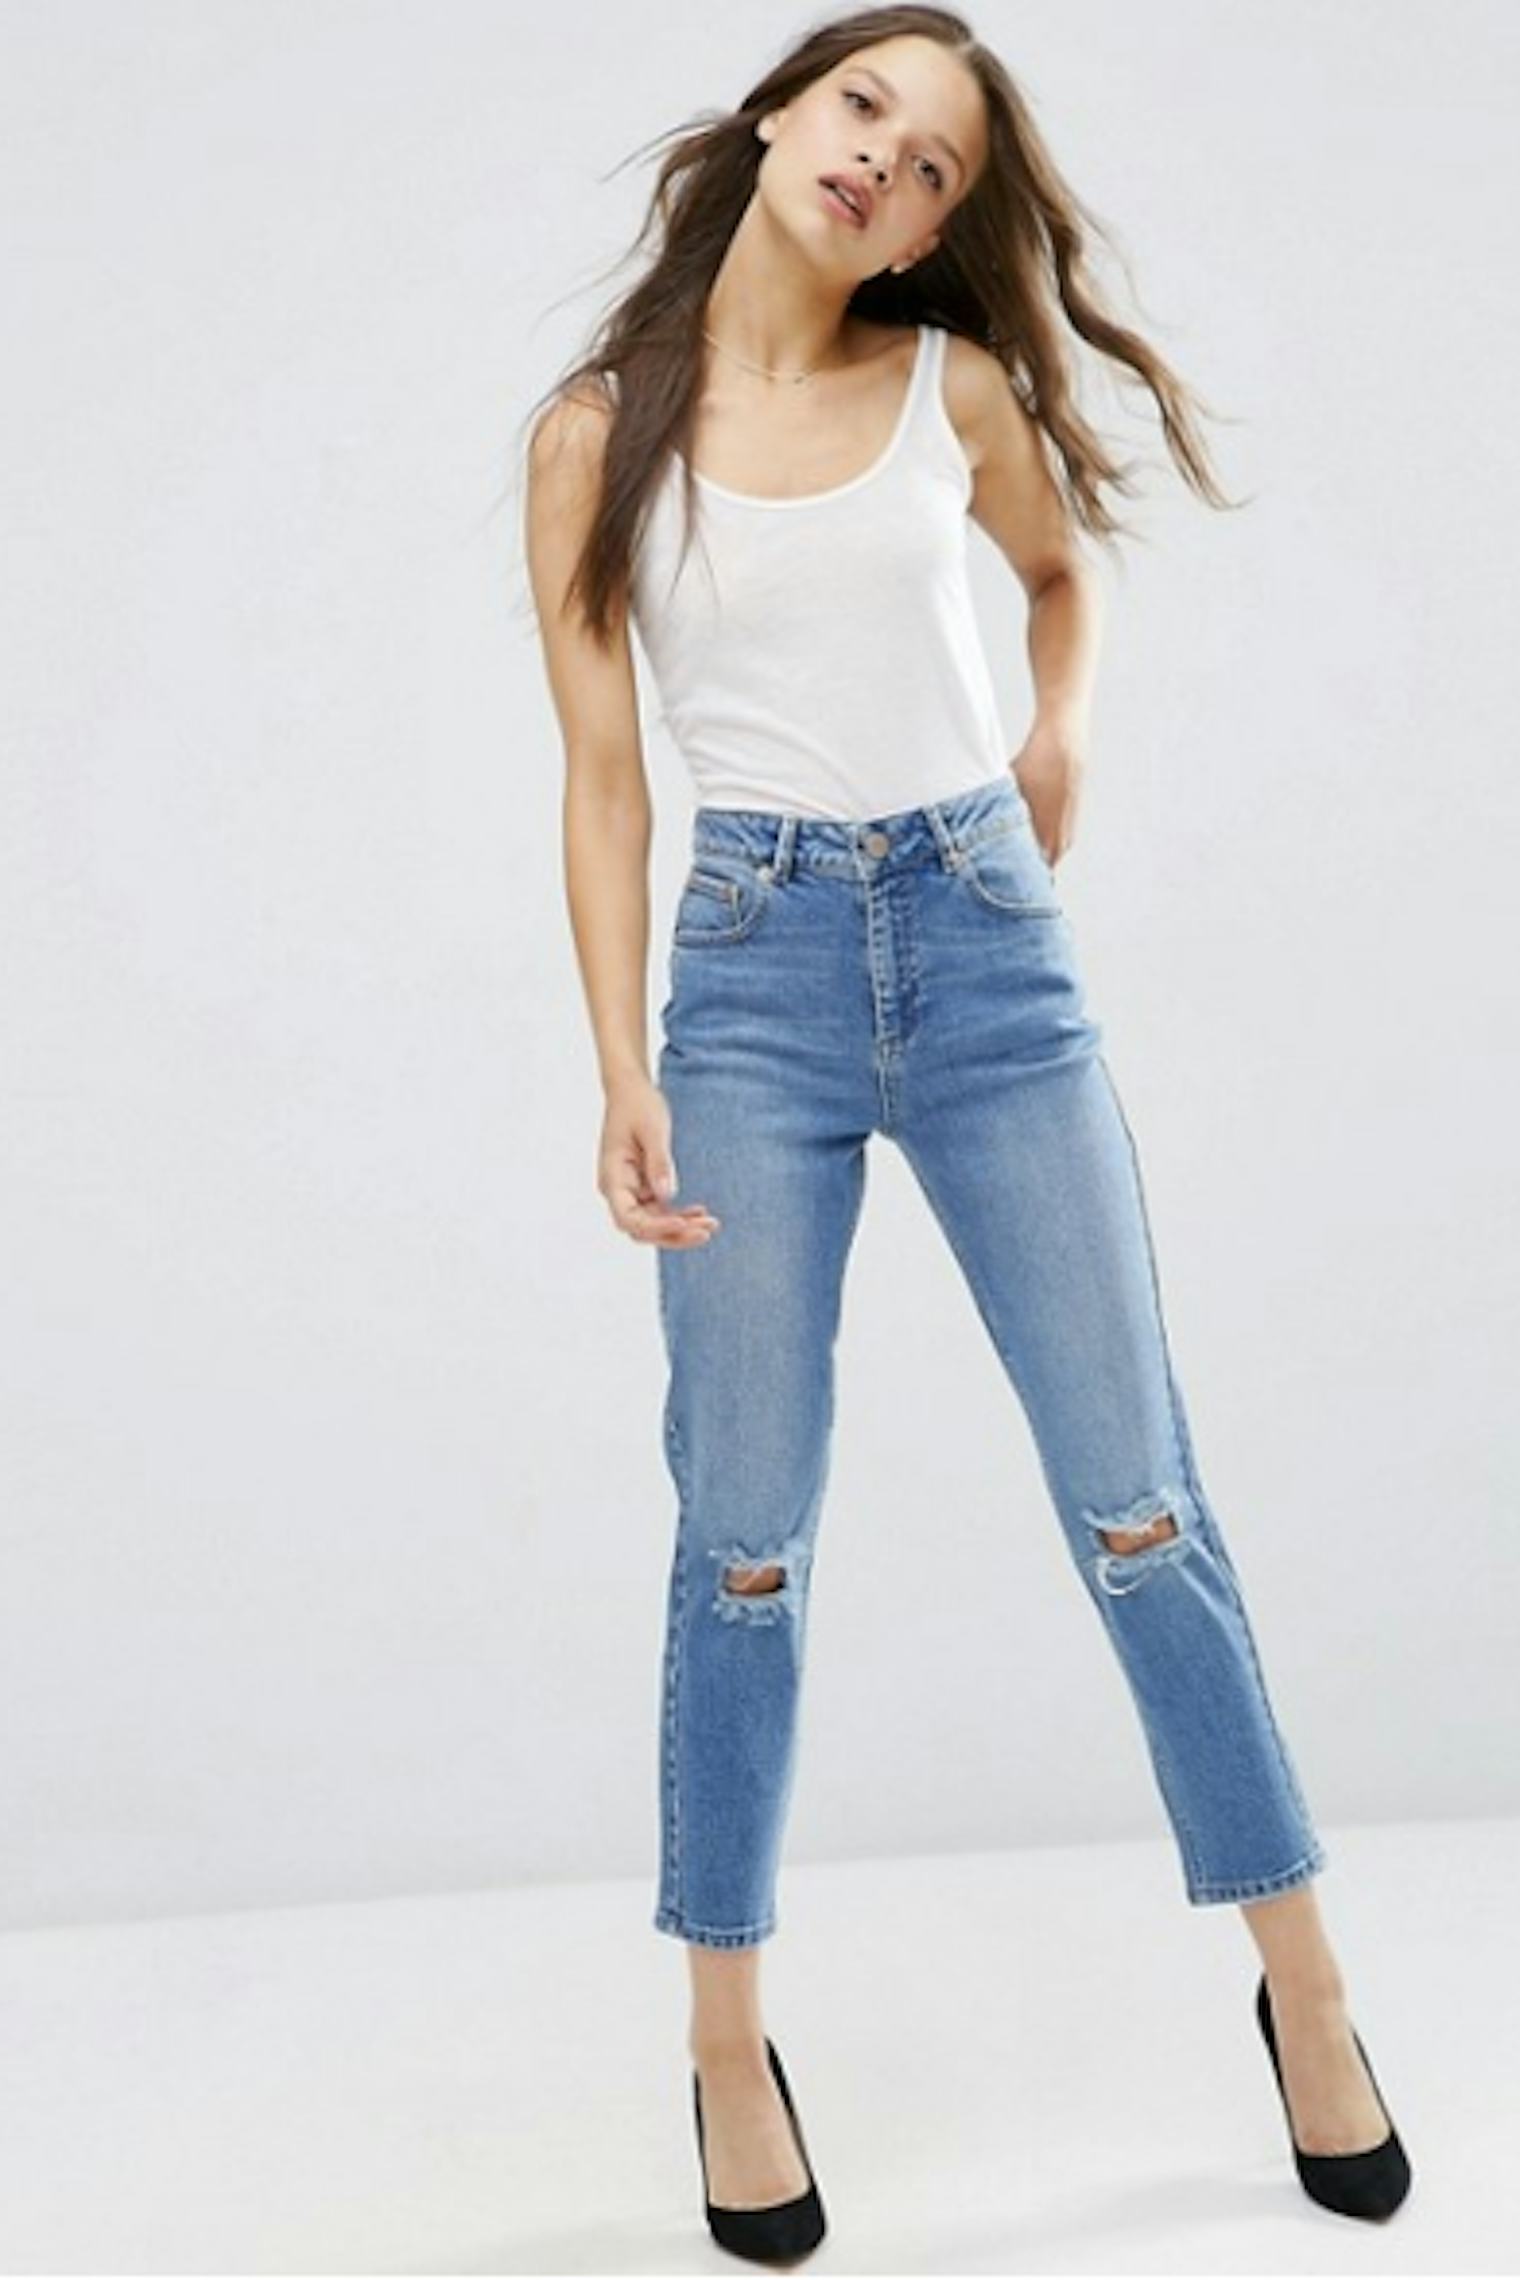 10 Cropped Jeans For Short People So You Can Save A Trip To The Tailor